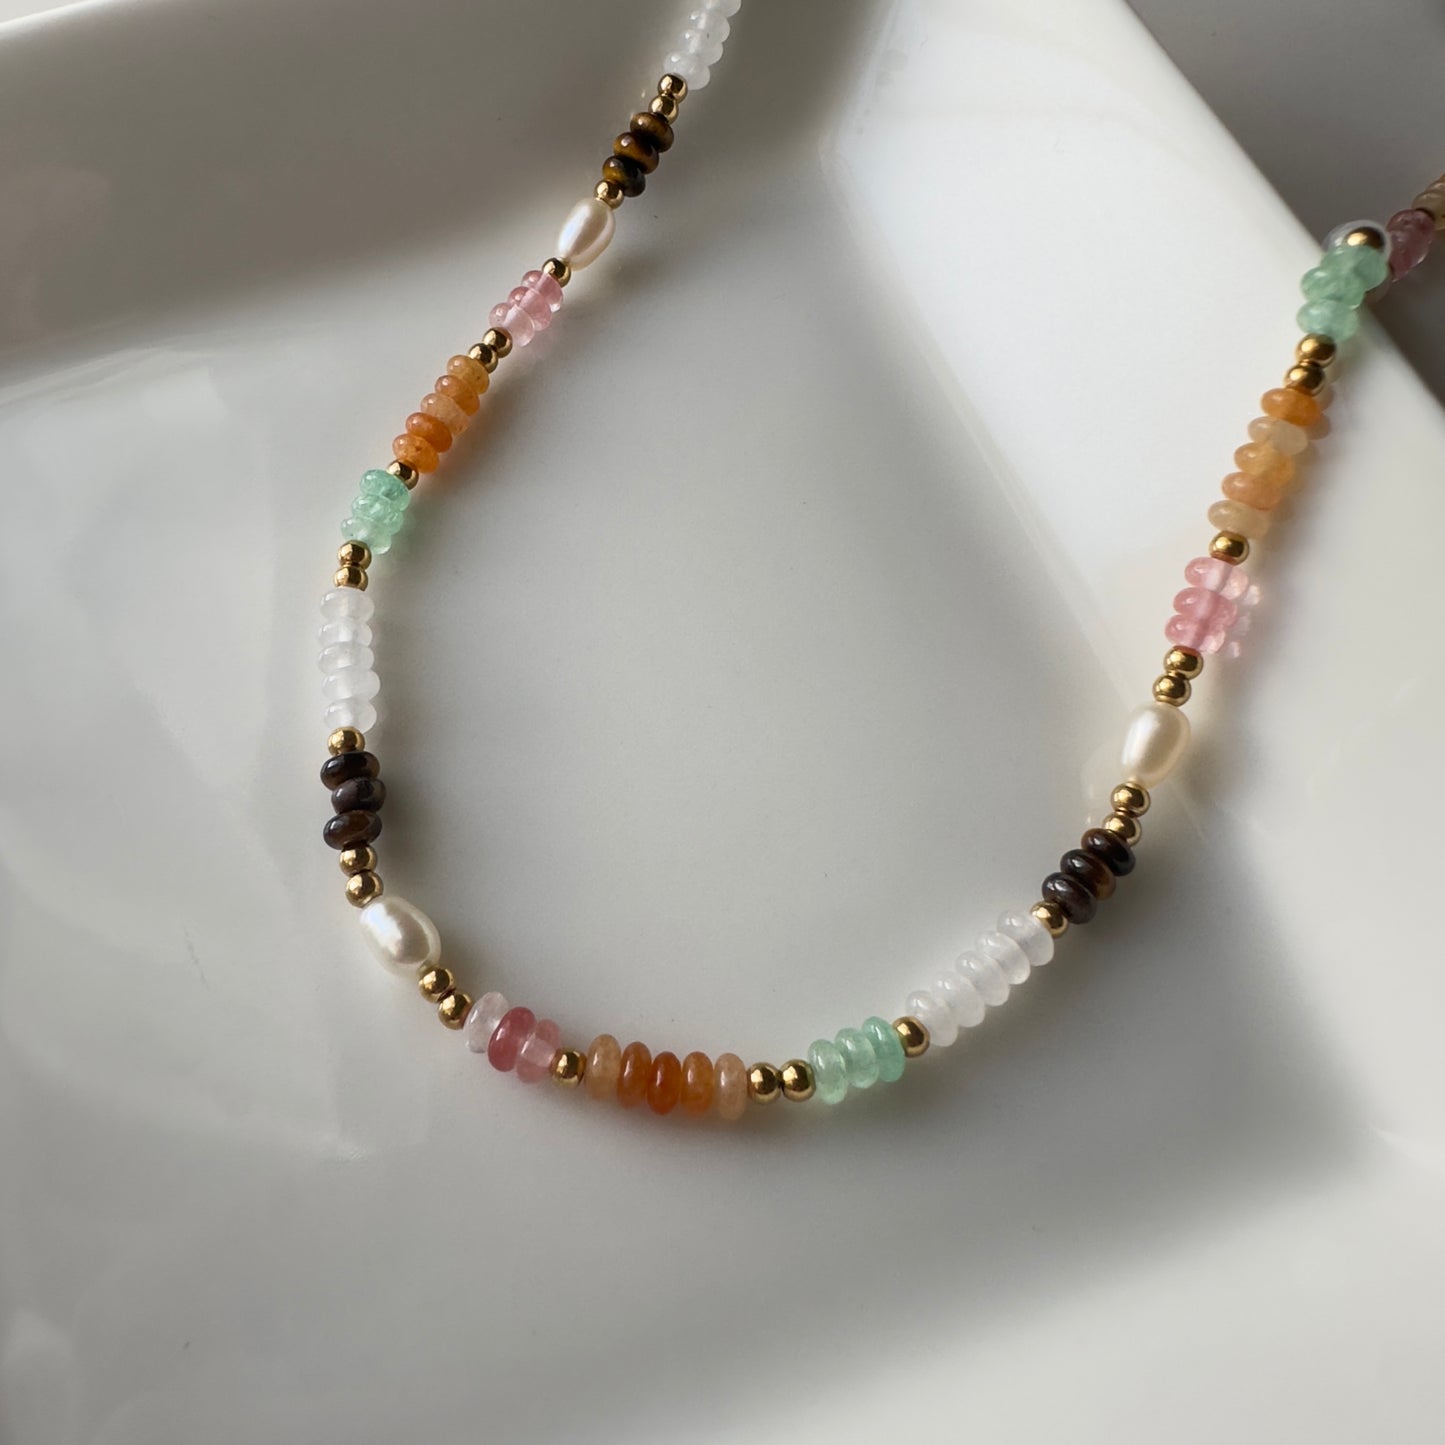 Emeryn Pearls and Natural Stones Necklace